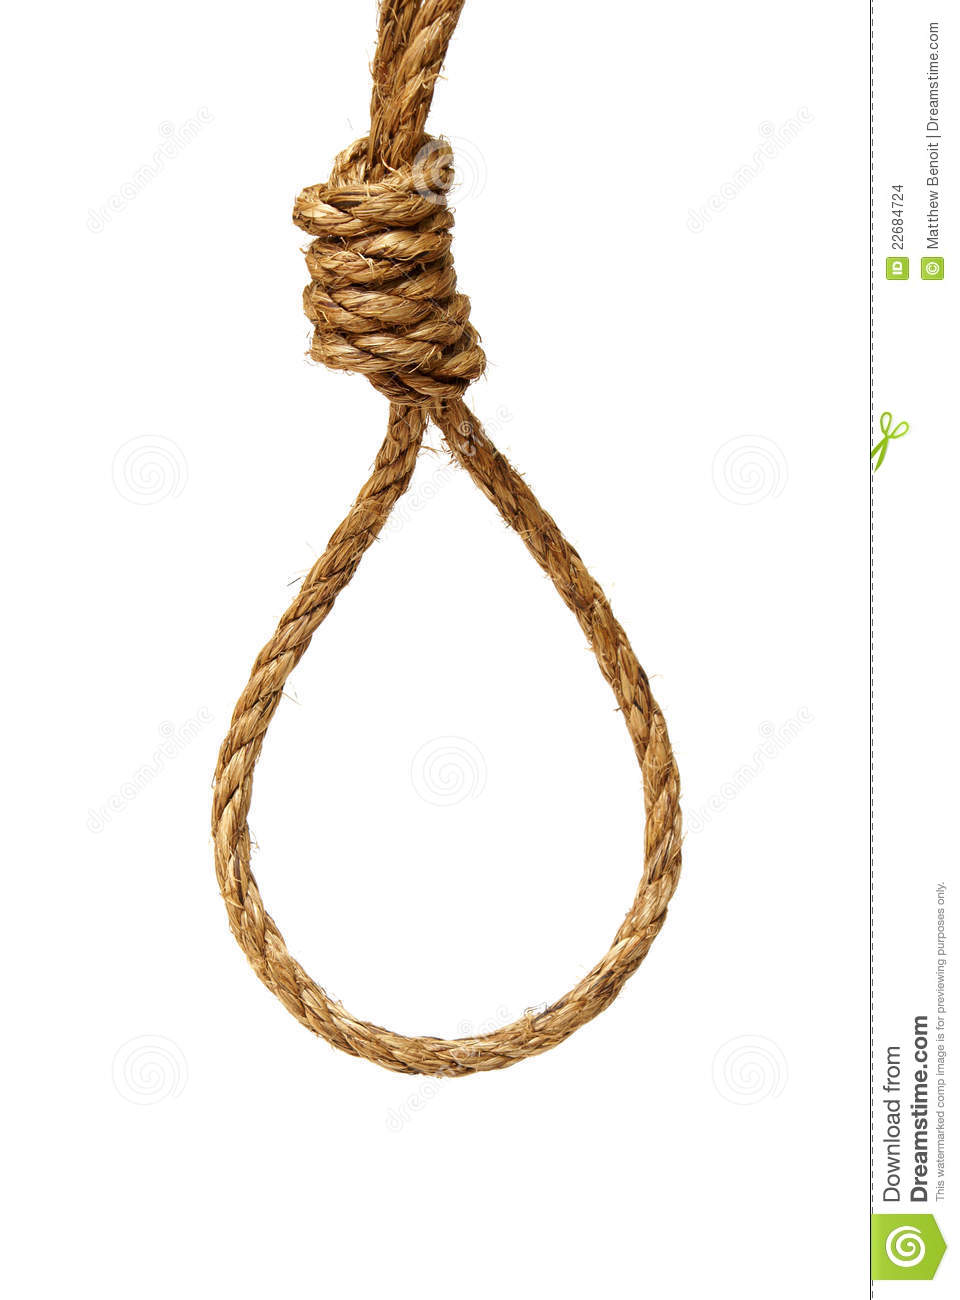 Ready Made Noose On A White Background